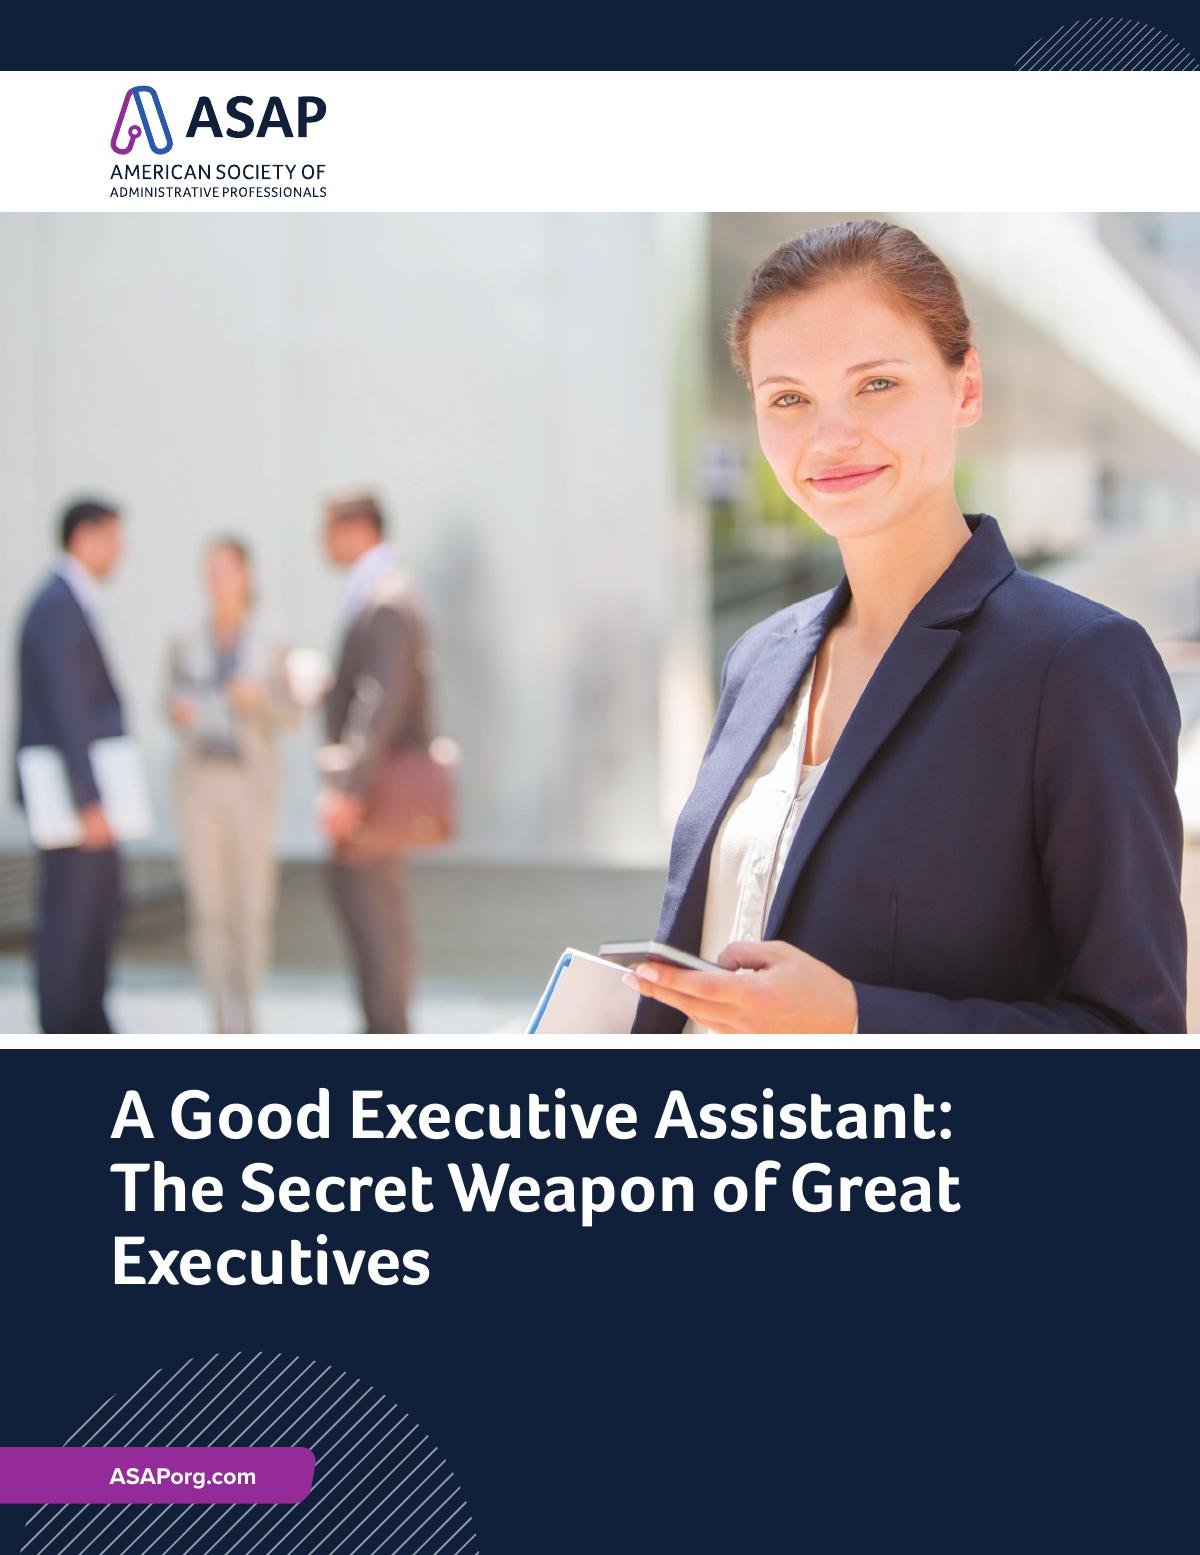 A Good Executive Assistant: The Secret Weapon of Great Executives